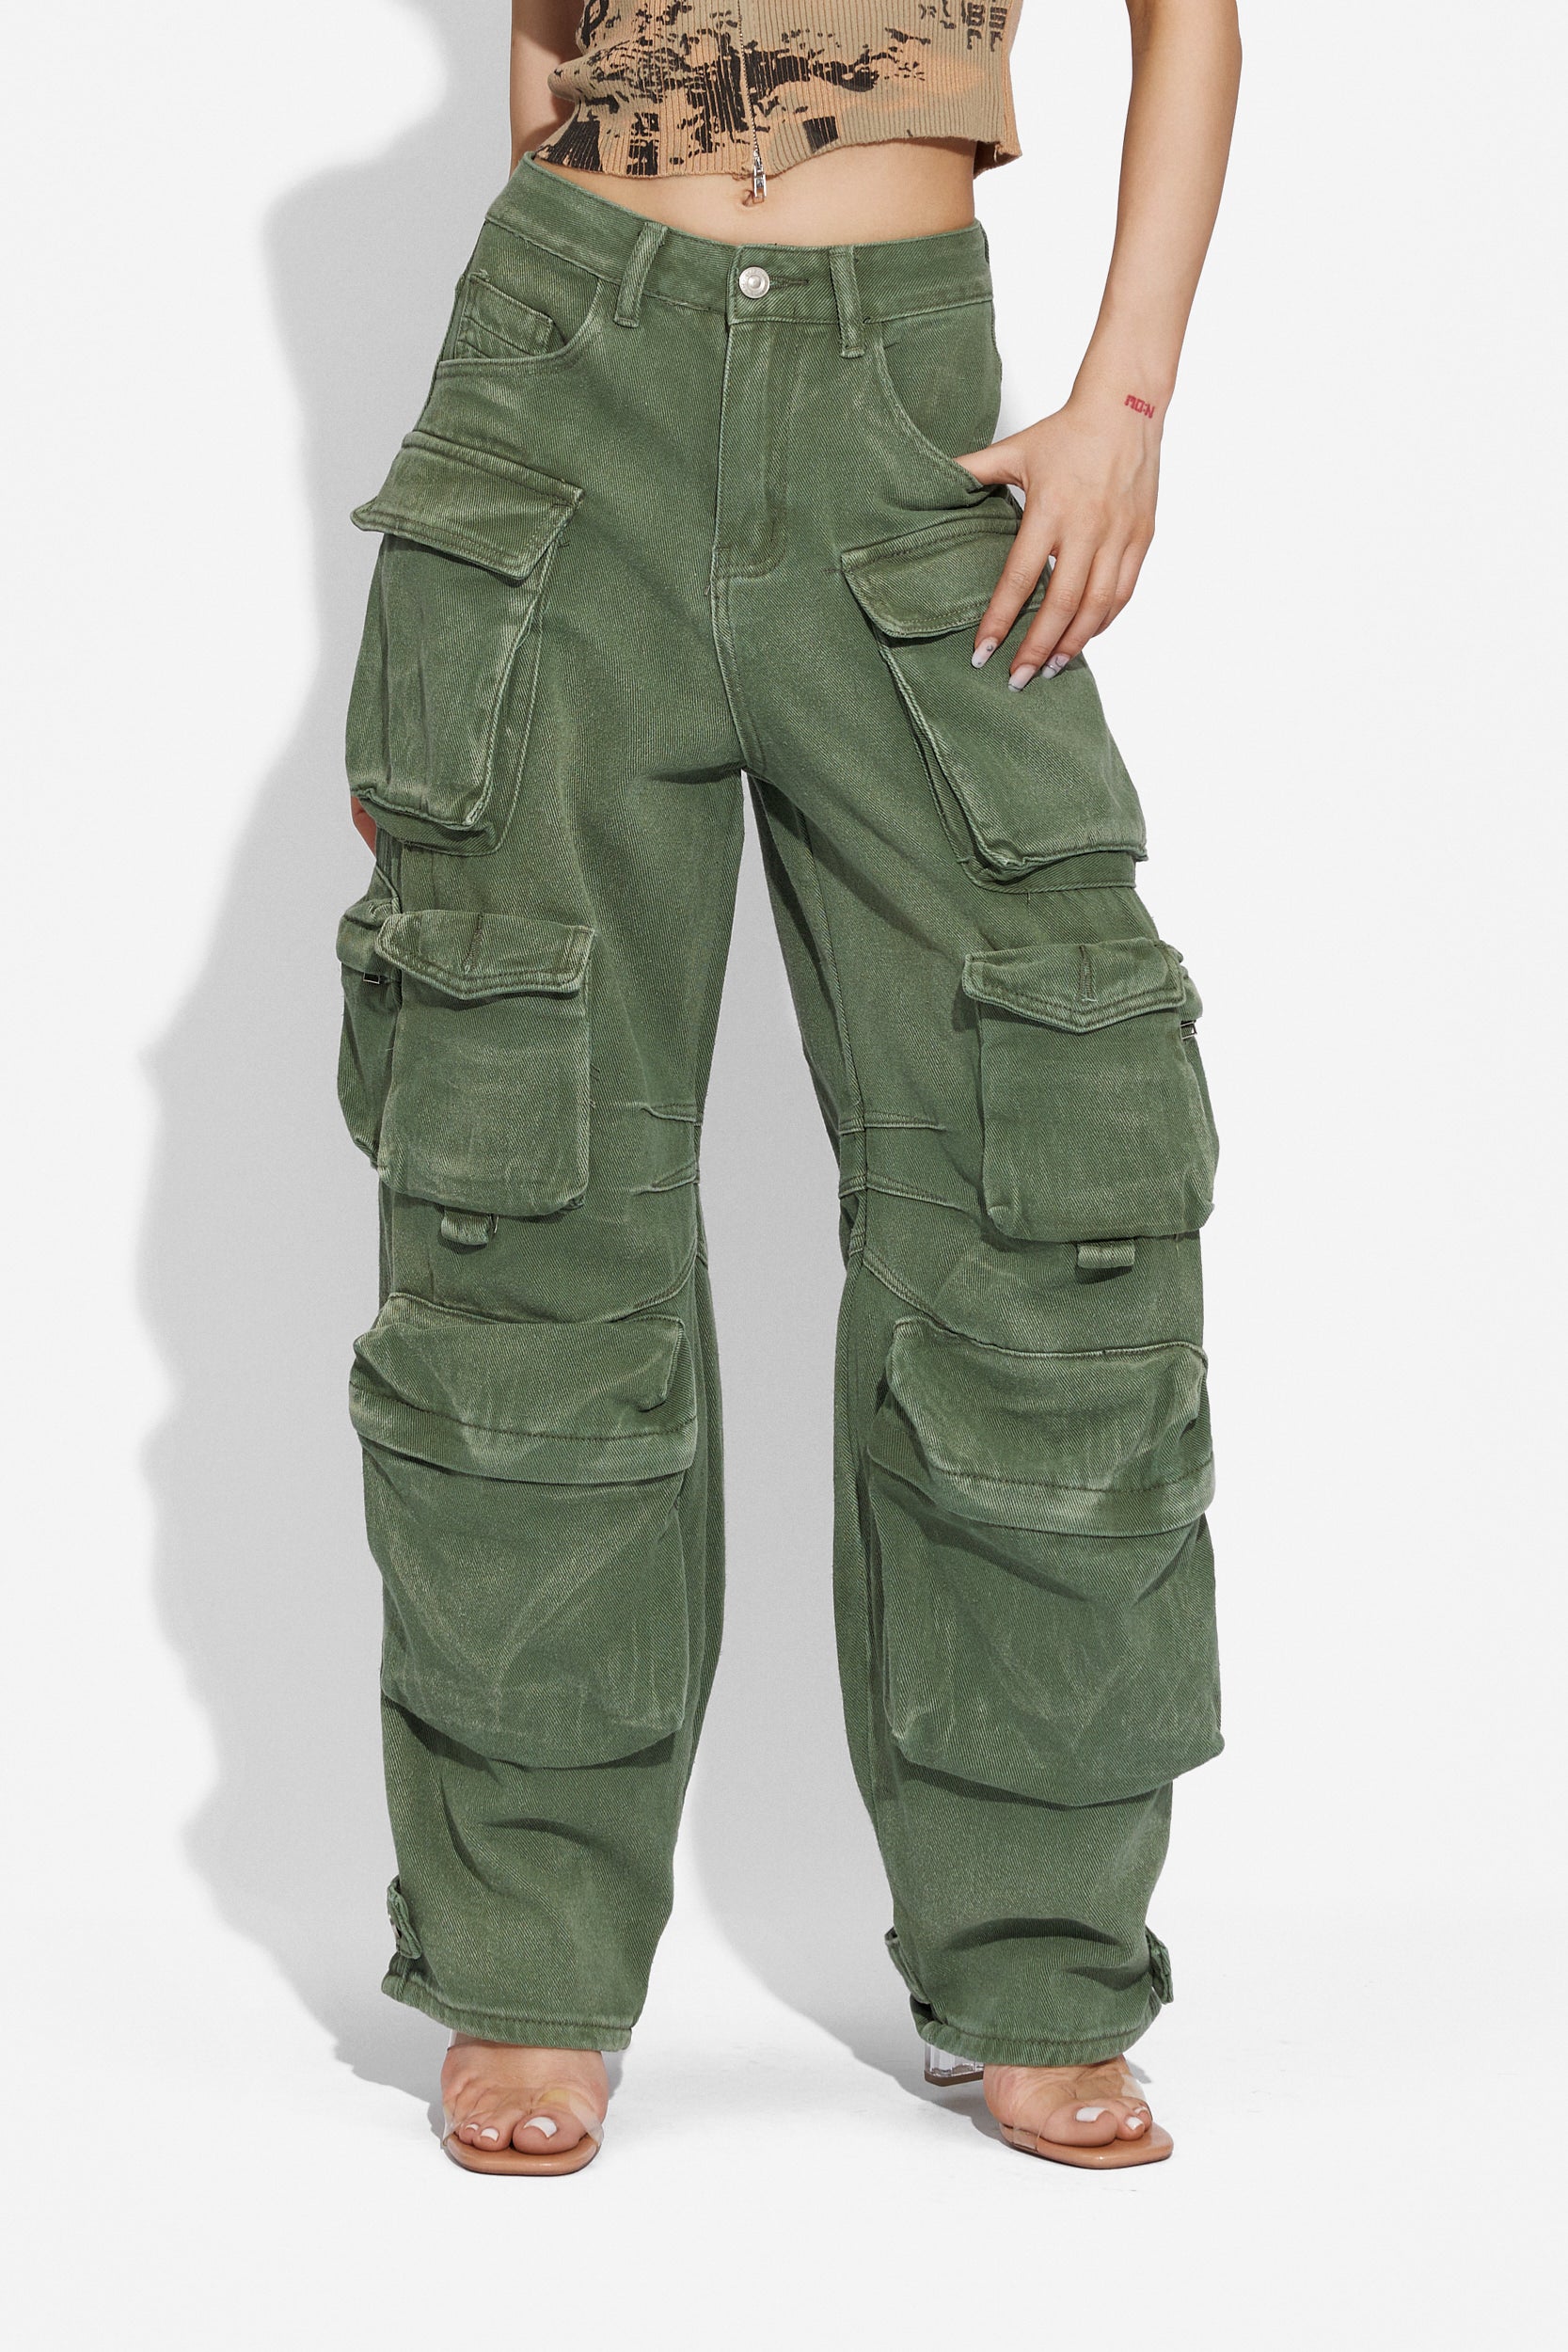 Women's casual green Cargo Bogas jeans